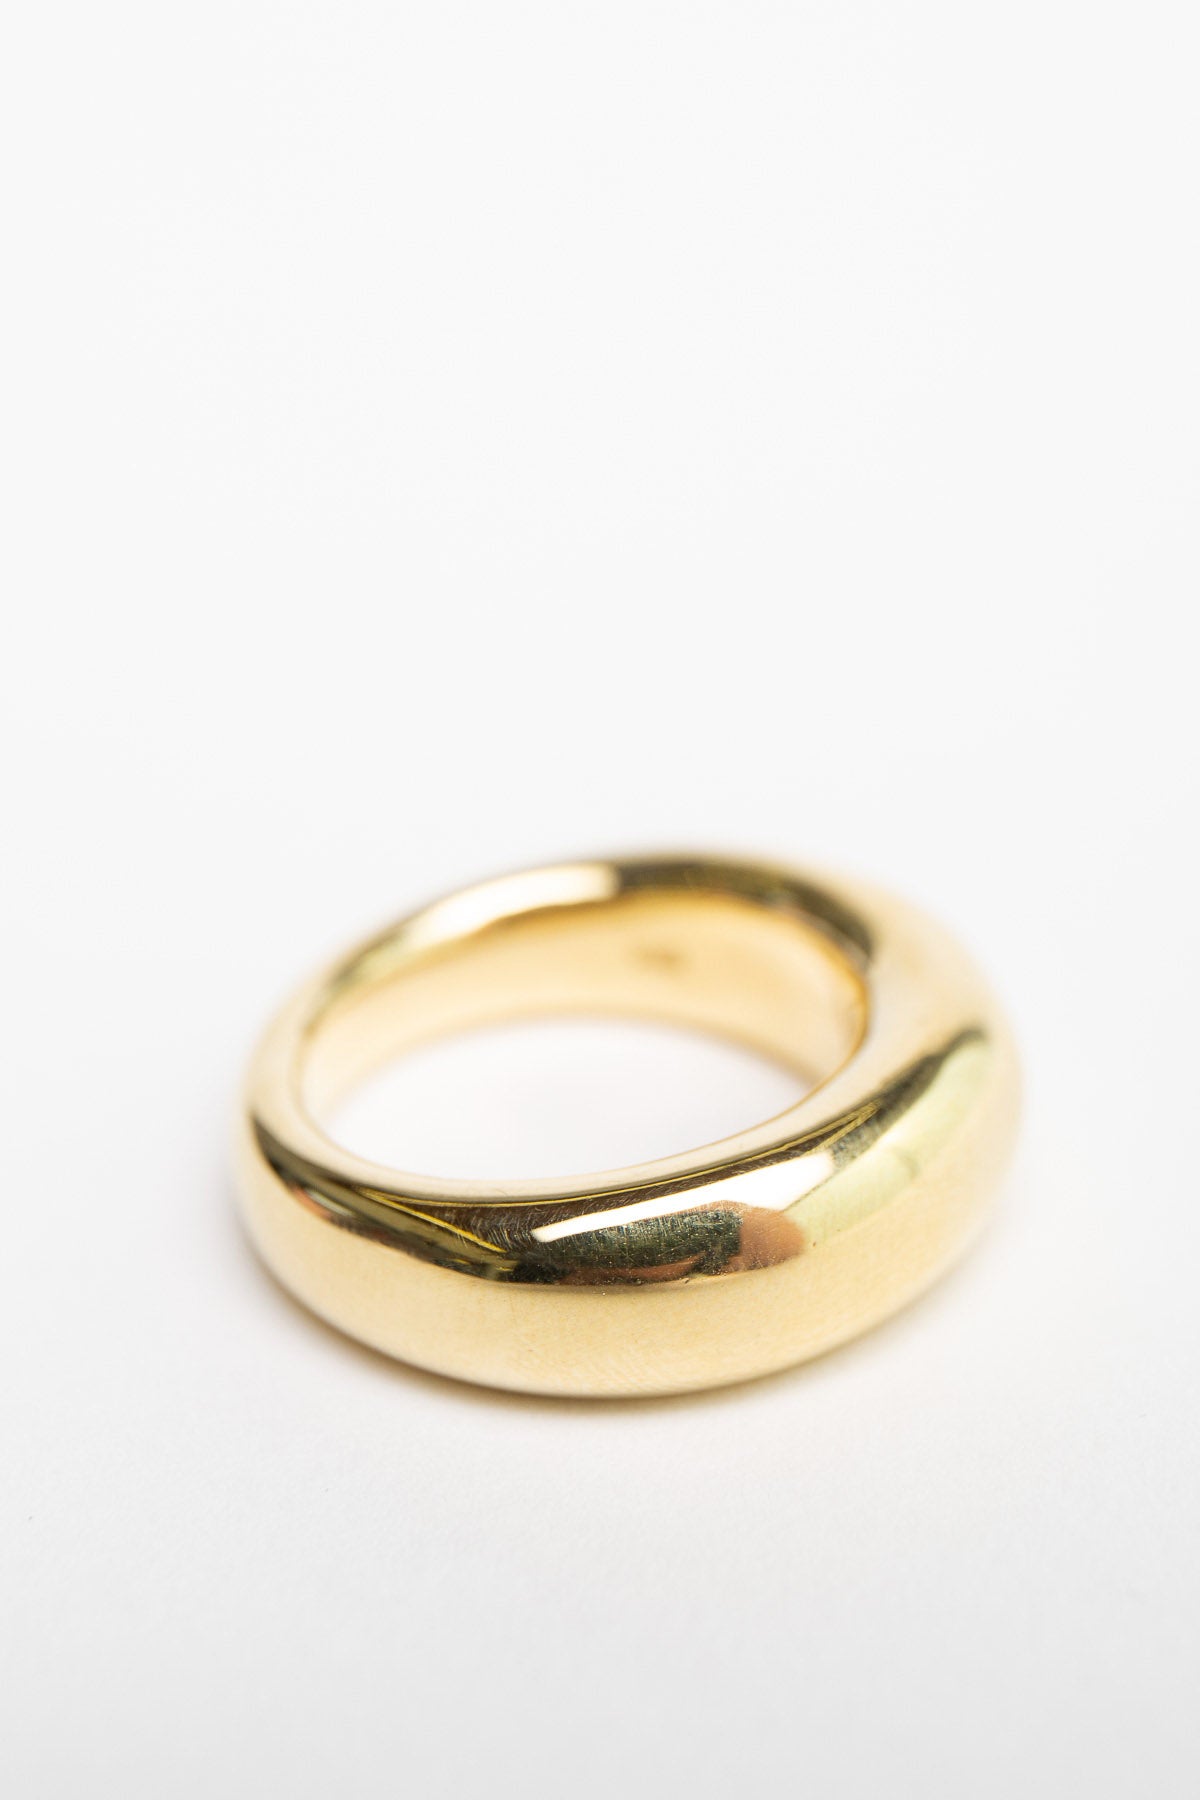 MAUD JEWELRY | 18K GOLD LOW DOME RING